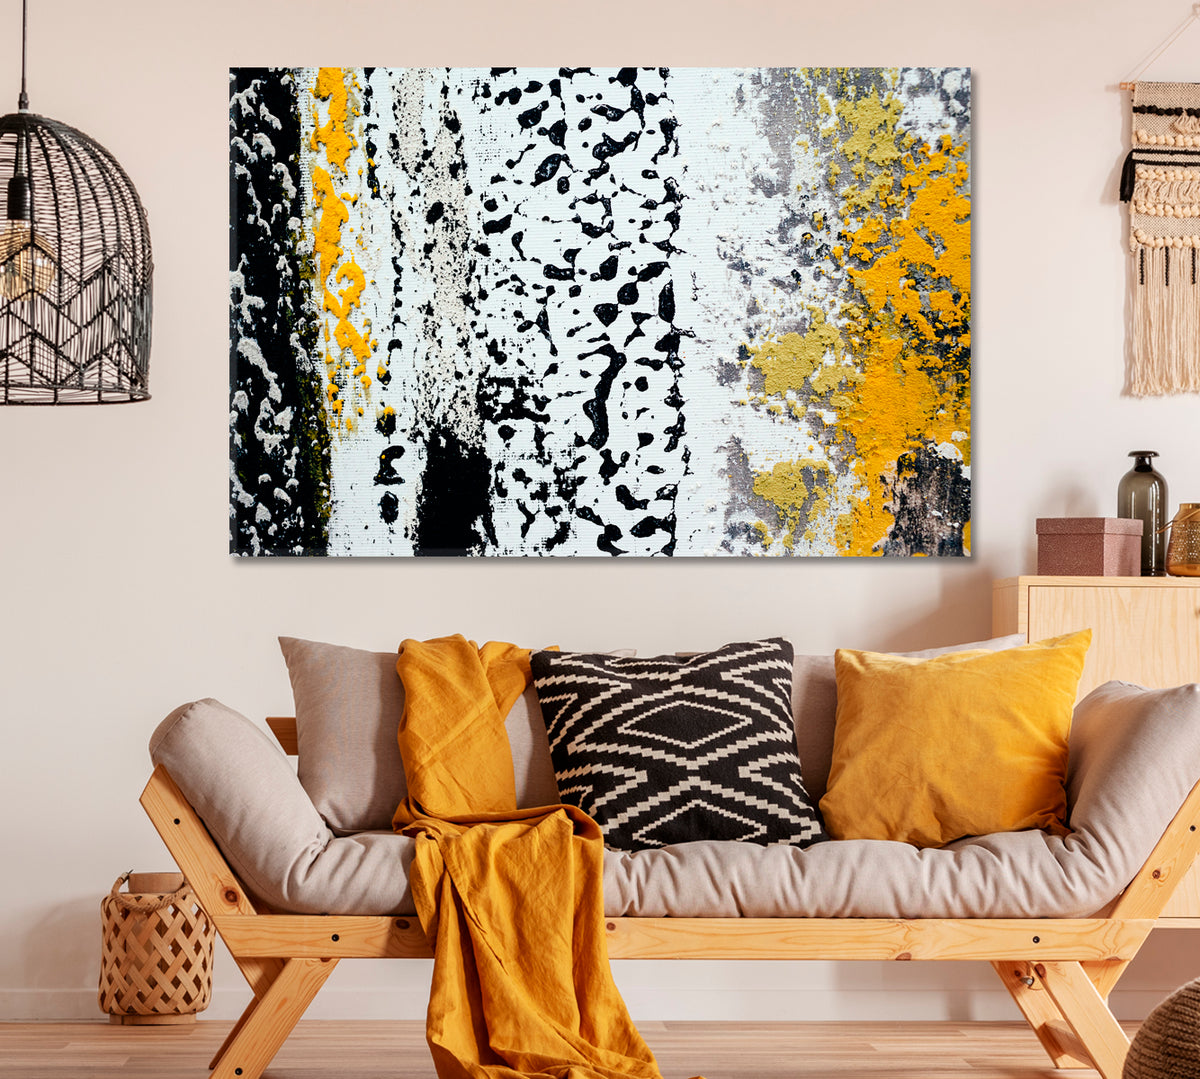 Abstract Black Splashes Canvas Print ArtLexy 1 Panel 24"x16" inches 